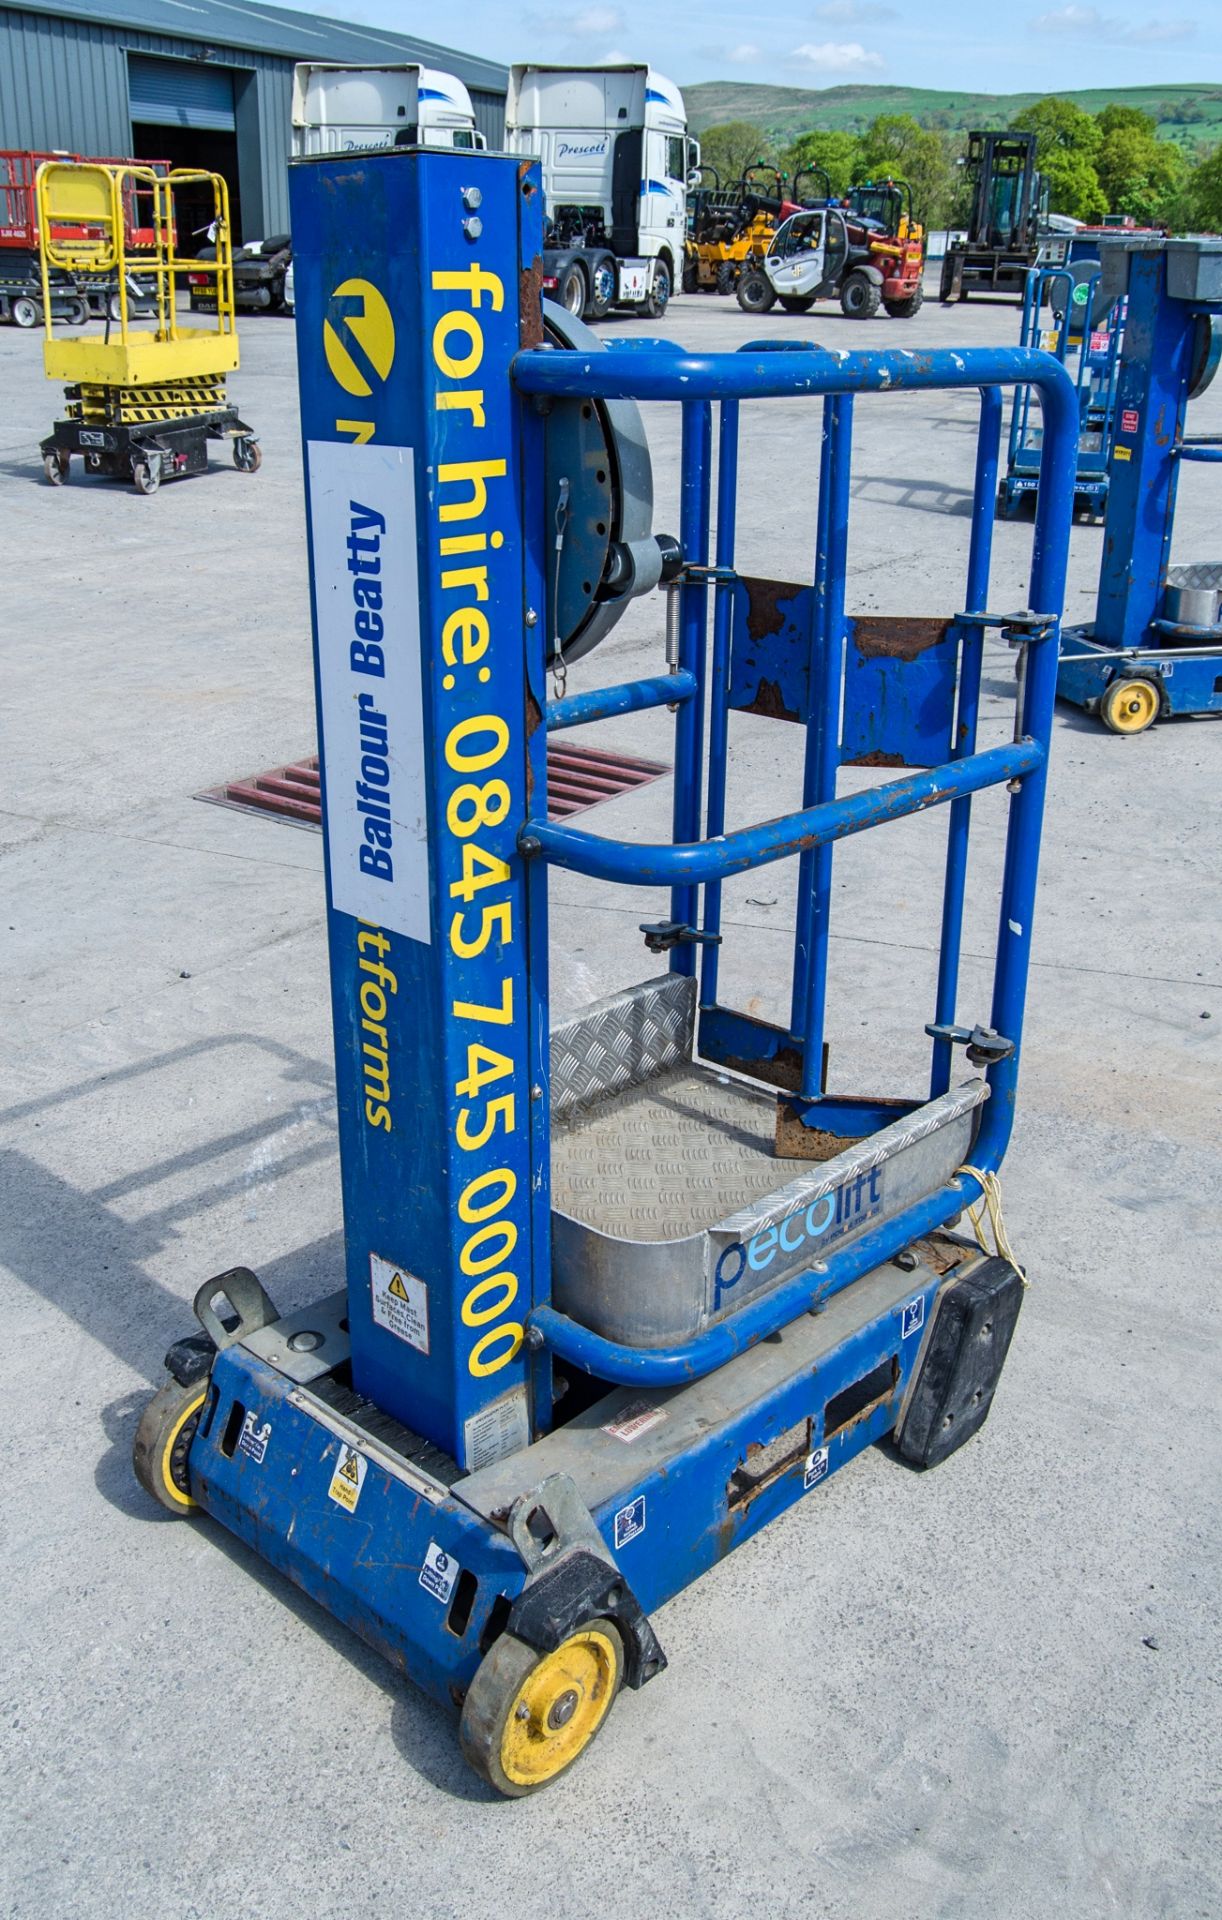 Power Towers Pecolift manual vertical mast access platform NWP462 - Image 2 of 3